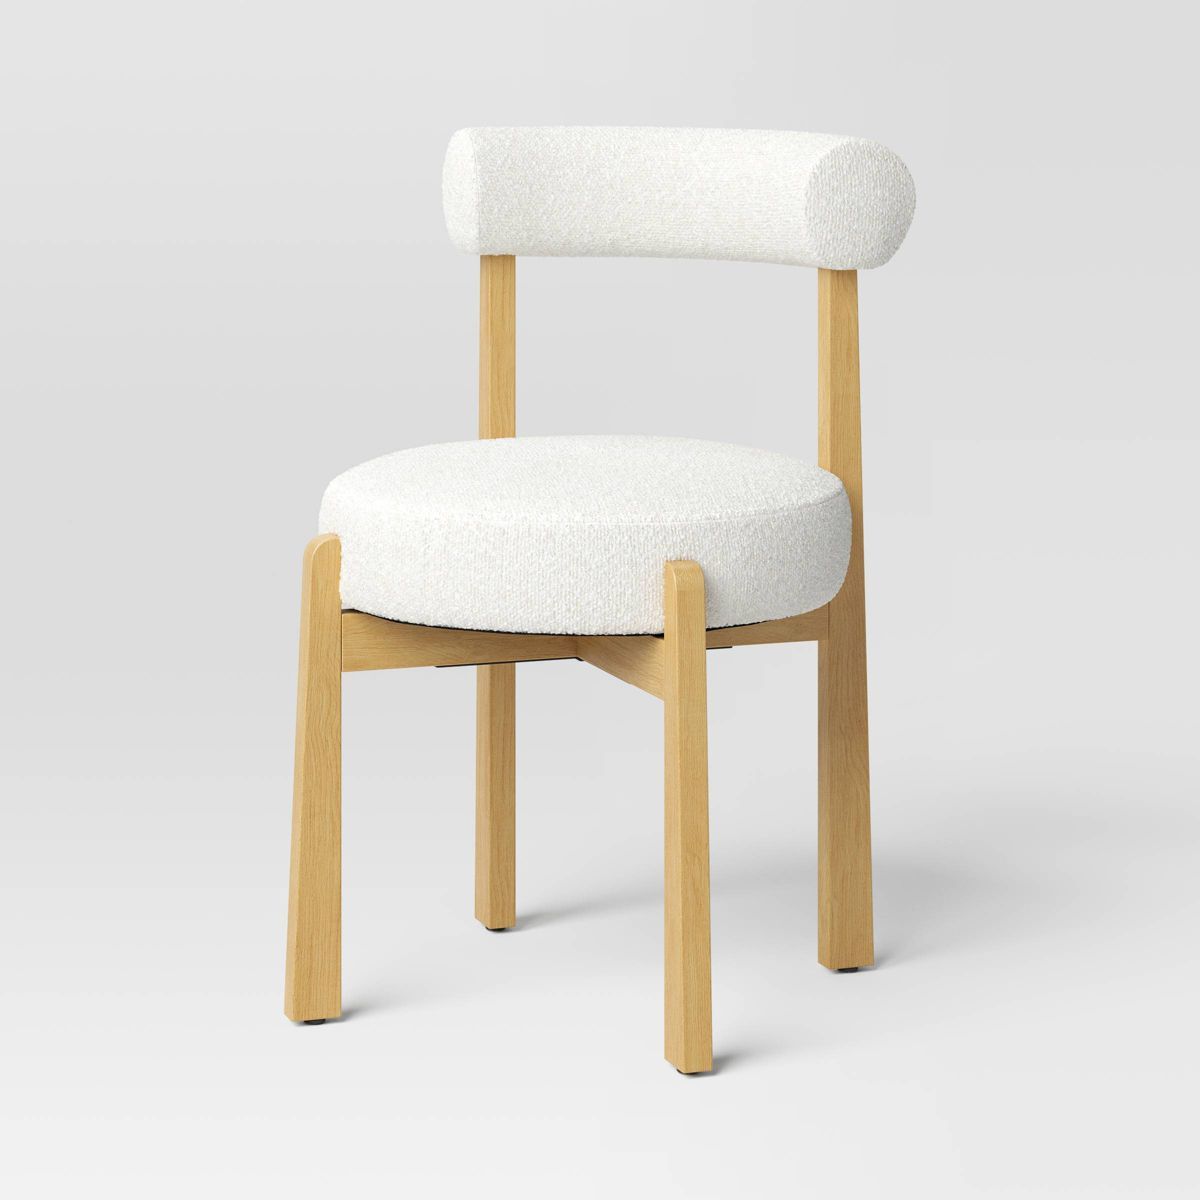 Sculptural Upholstered and Wood Dining Chair Cream - Threshold™ | Target